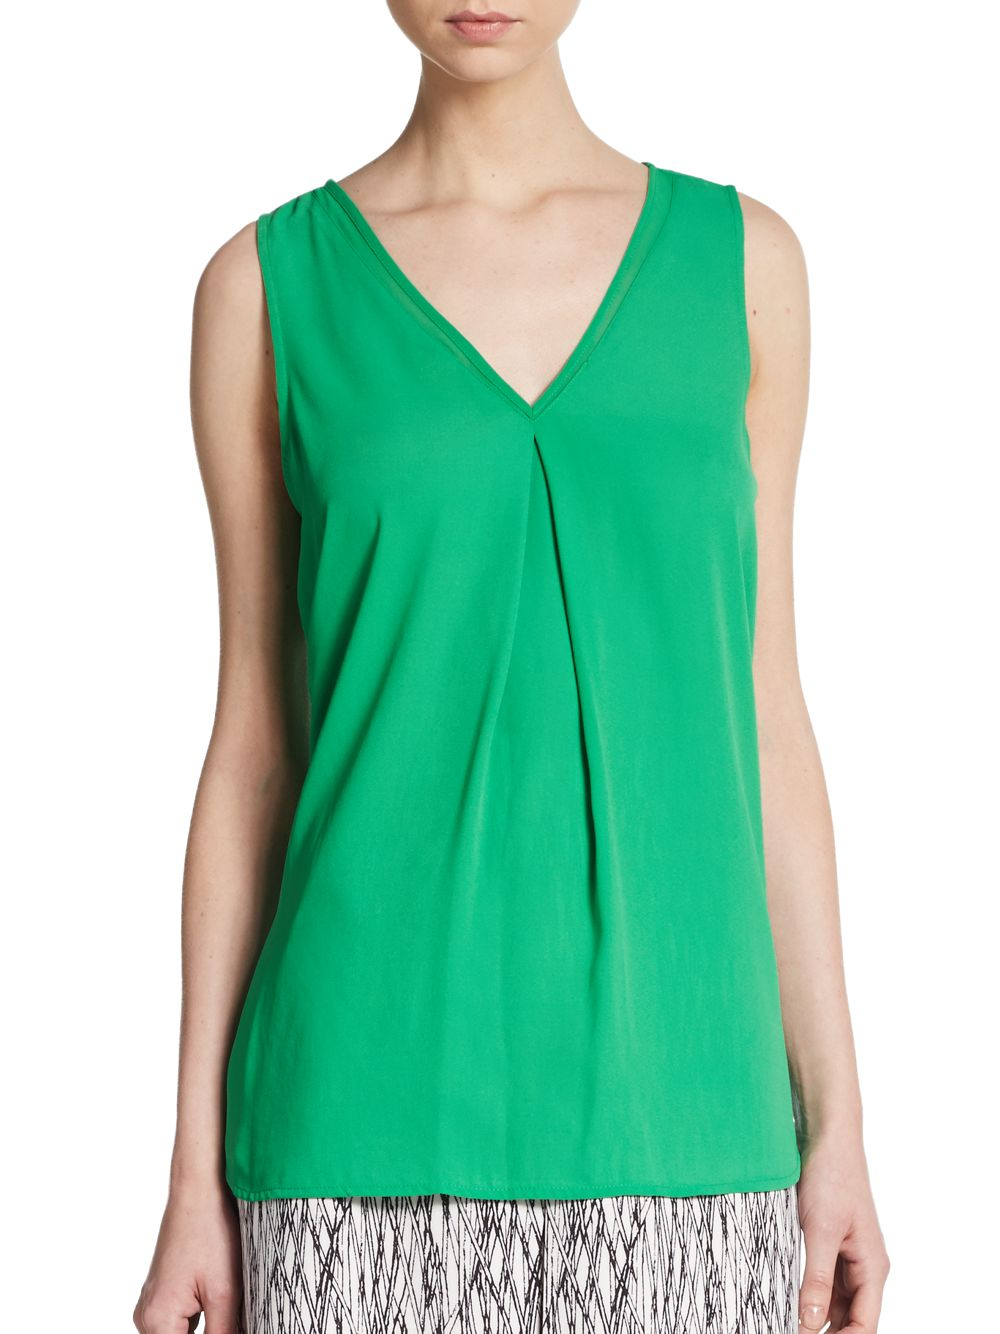 Lyst - Vince Camuto Pleat-front Sleeveless Blouse in Green